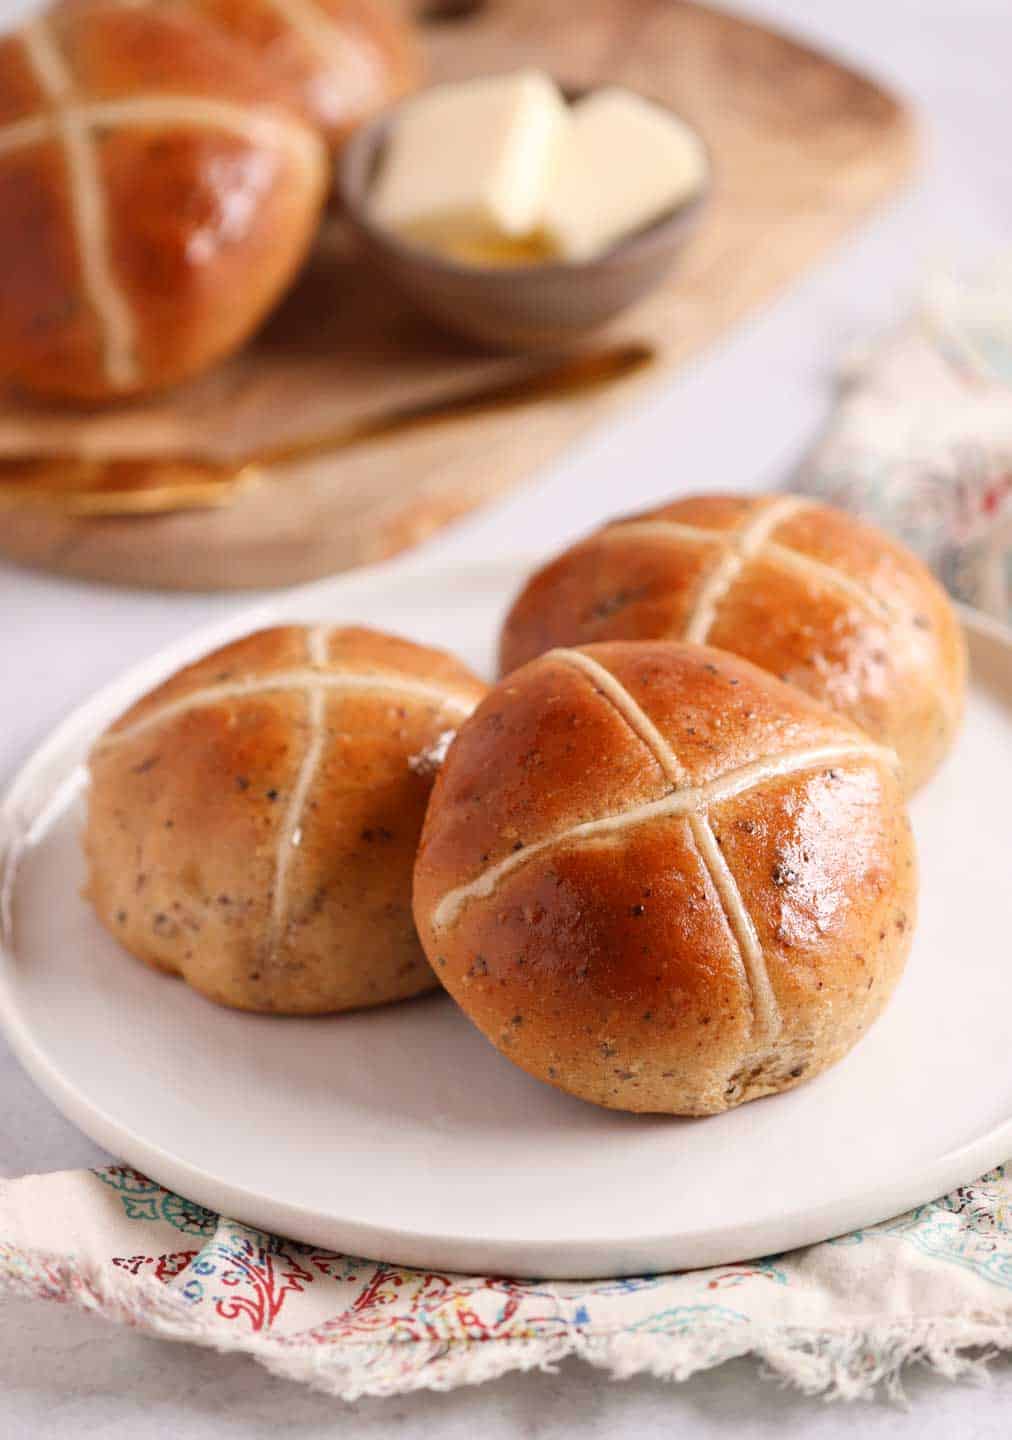 up close shot of hot cross buns on a place with some in the background